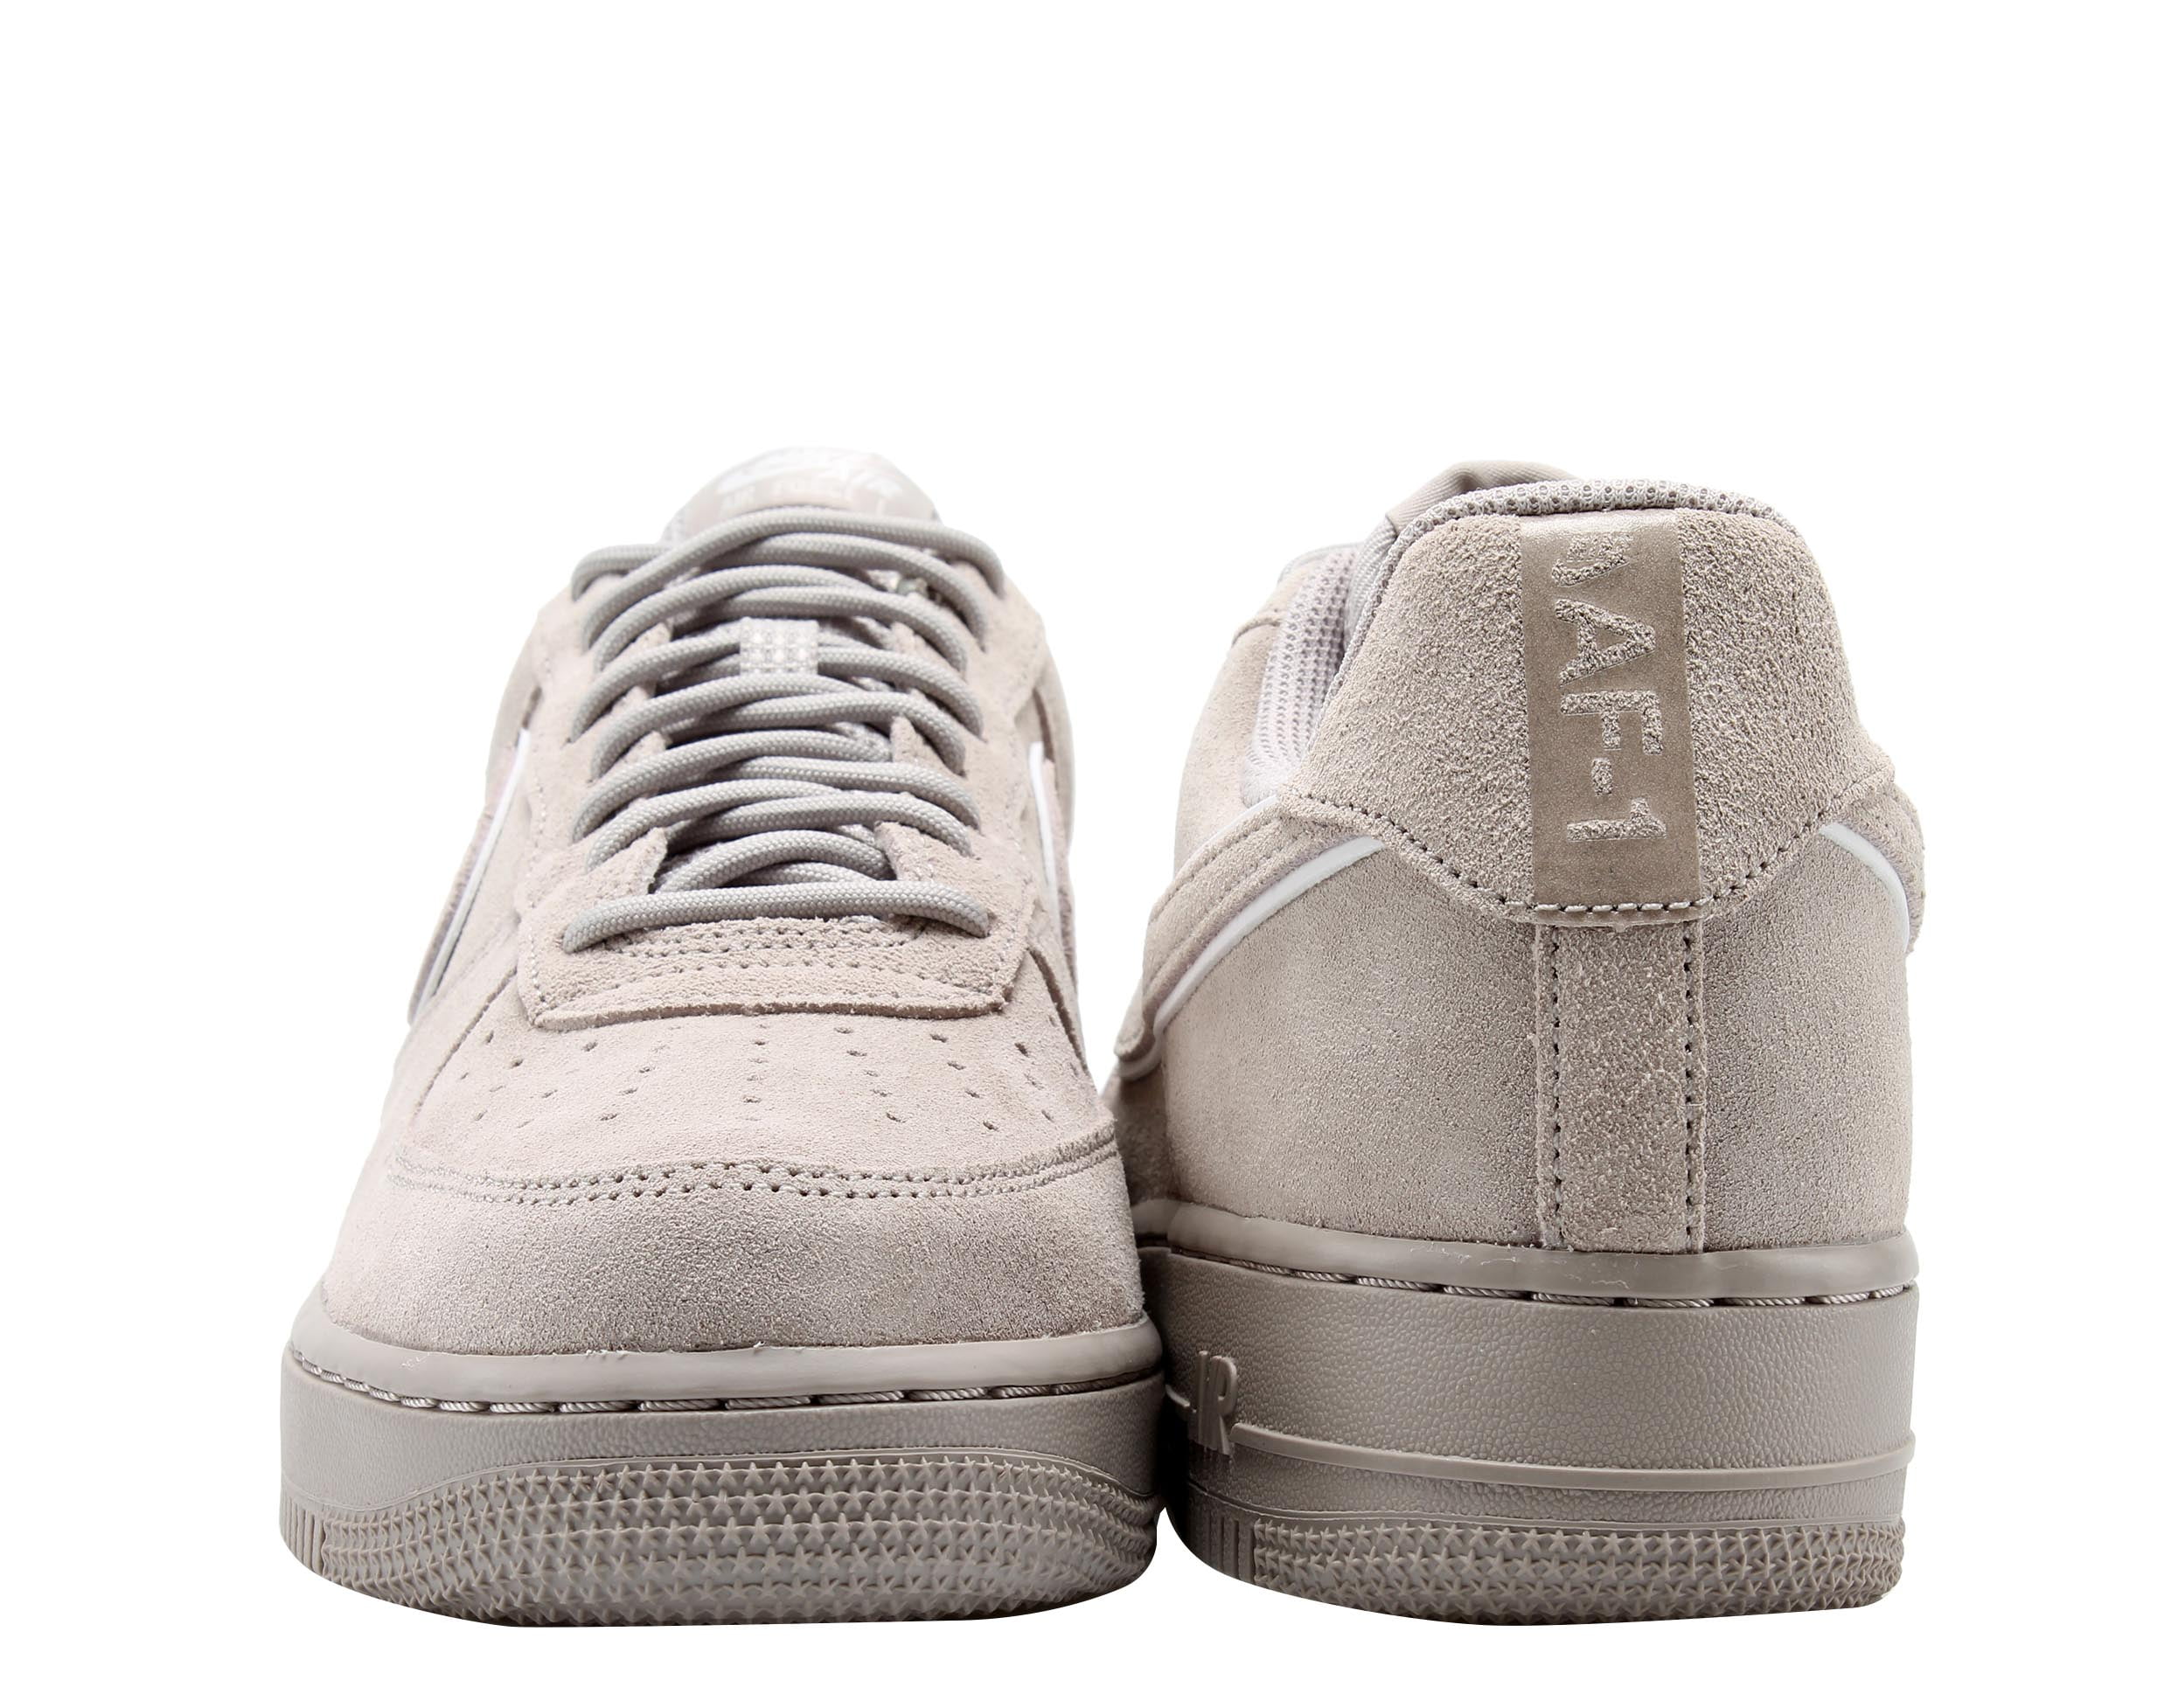 Nike Air Force 1 '07 LV8 Suede Men's Running Shoes Moon Particle/Moon  Particle aa1117-201